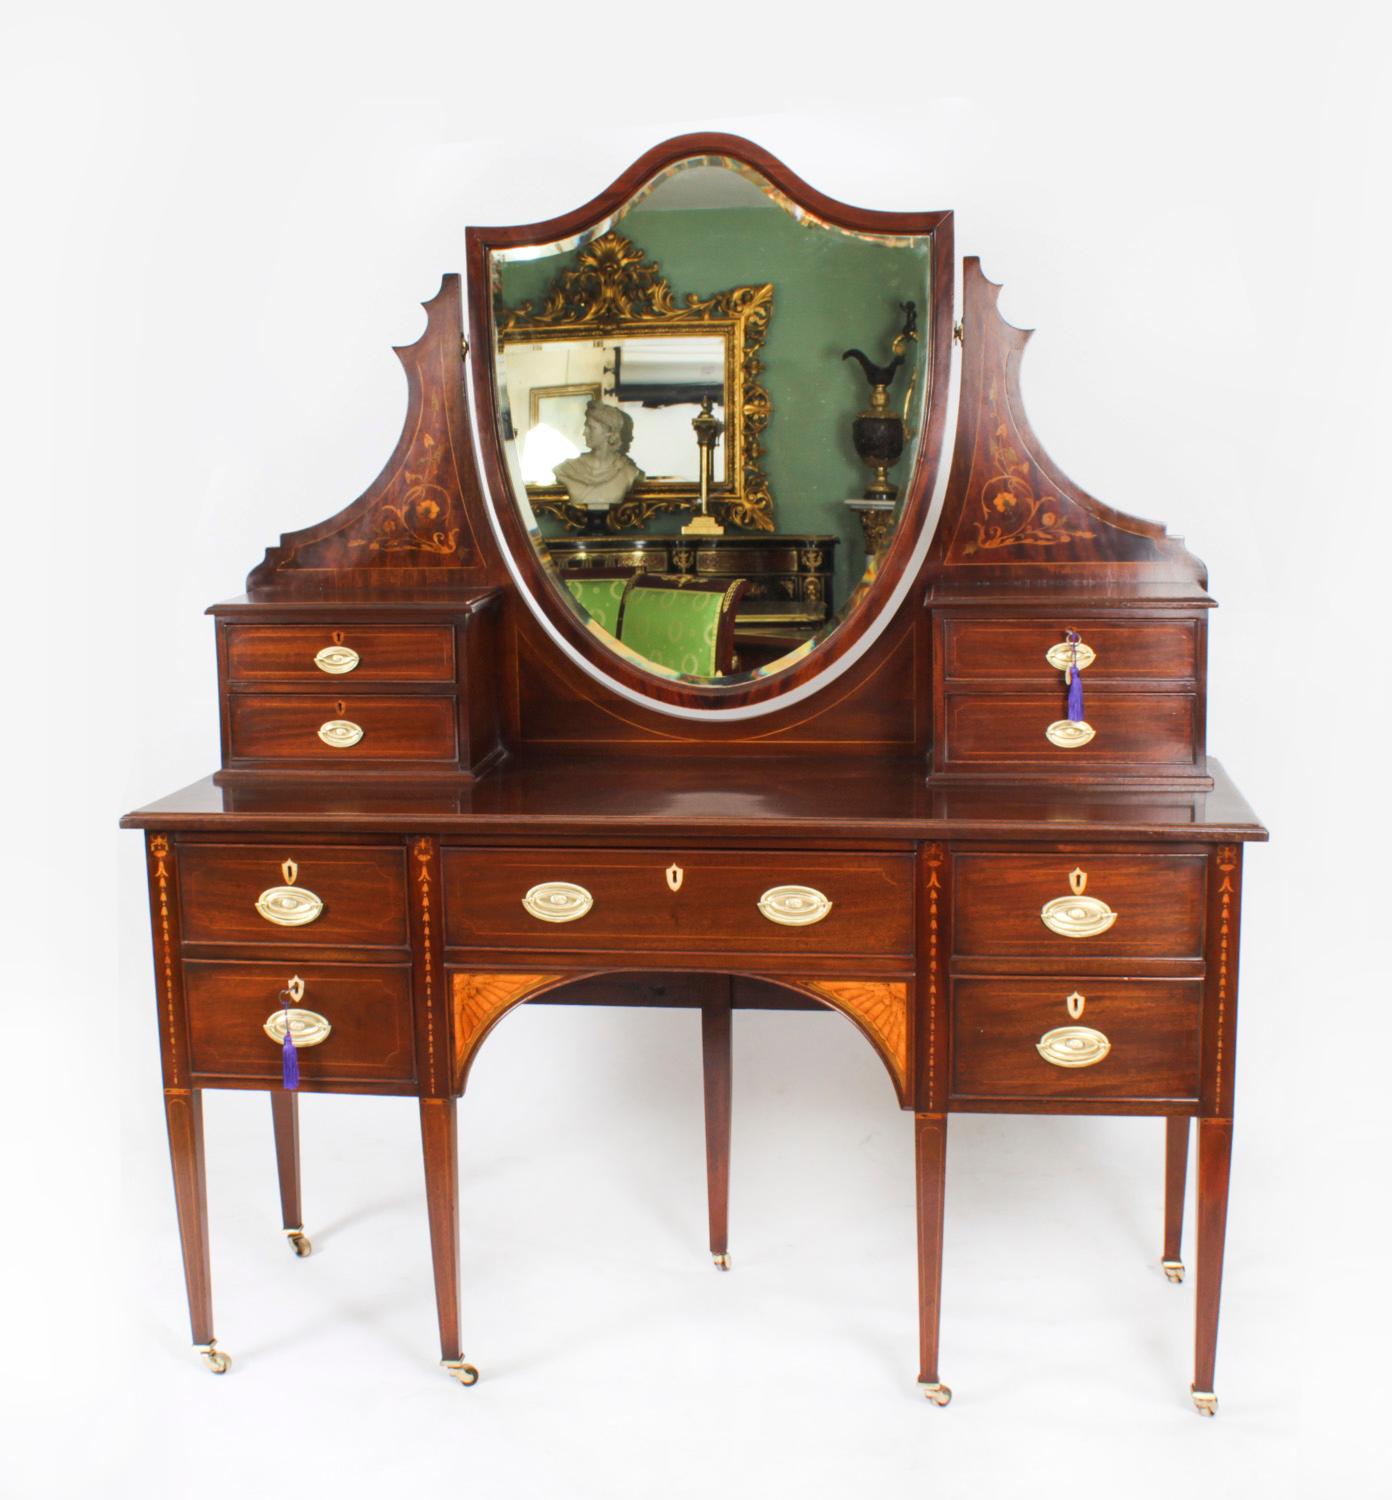 This is a totally fabulous Antique Late Victorian Sheraton Revival Mahogany and Marquetry dressing table, circa 1890 in date.
 
THE BOTANICAL NAME FOR THE MAHOGANY THAT THIS DRESSING TABLE IS MADE OF IS SWIETENIA MACROPHYLLA AND THIS TYPE OF